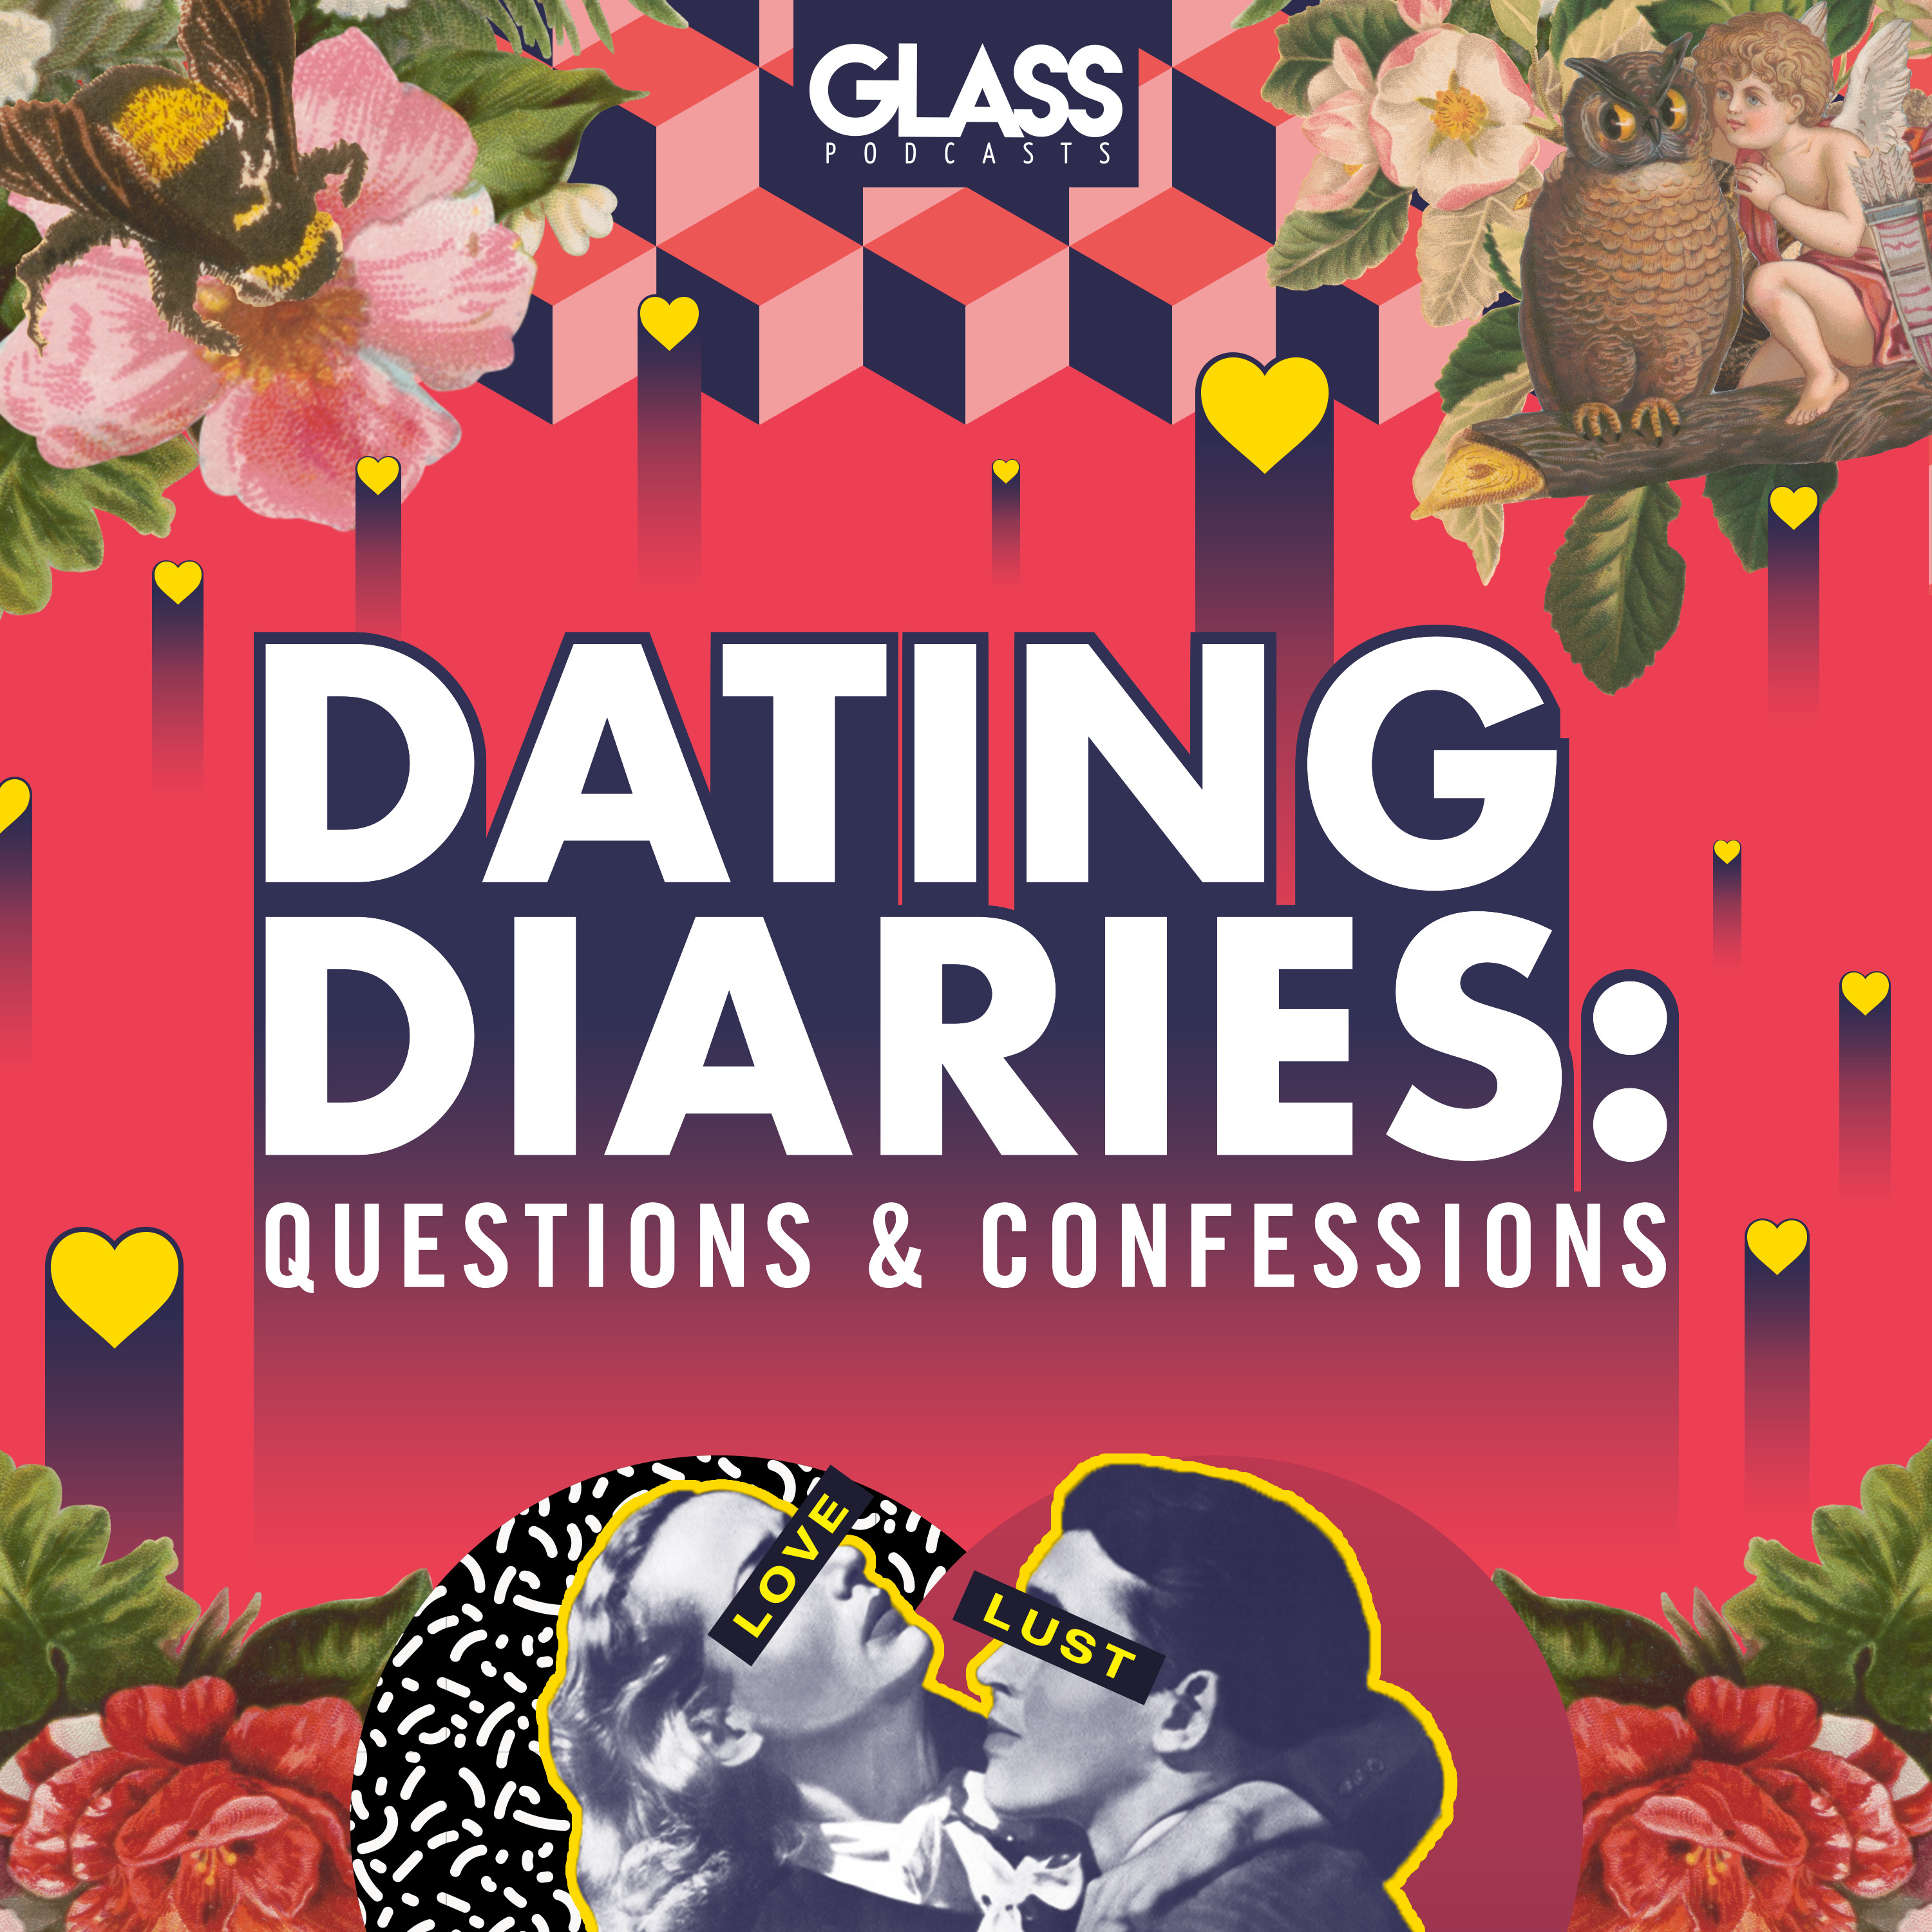 Questions diary